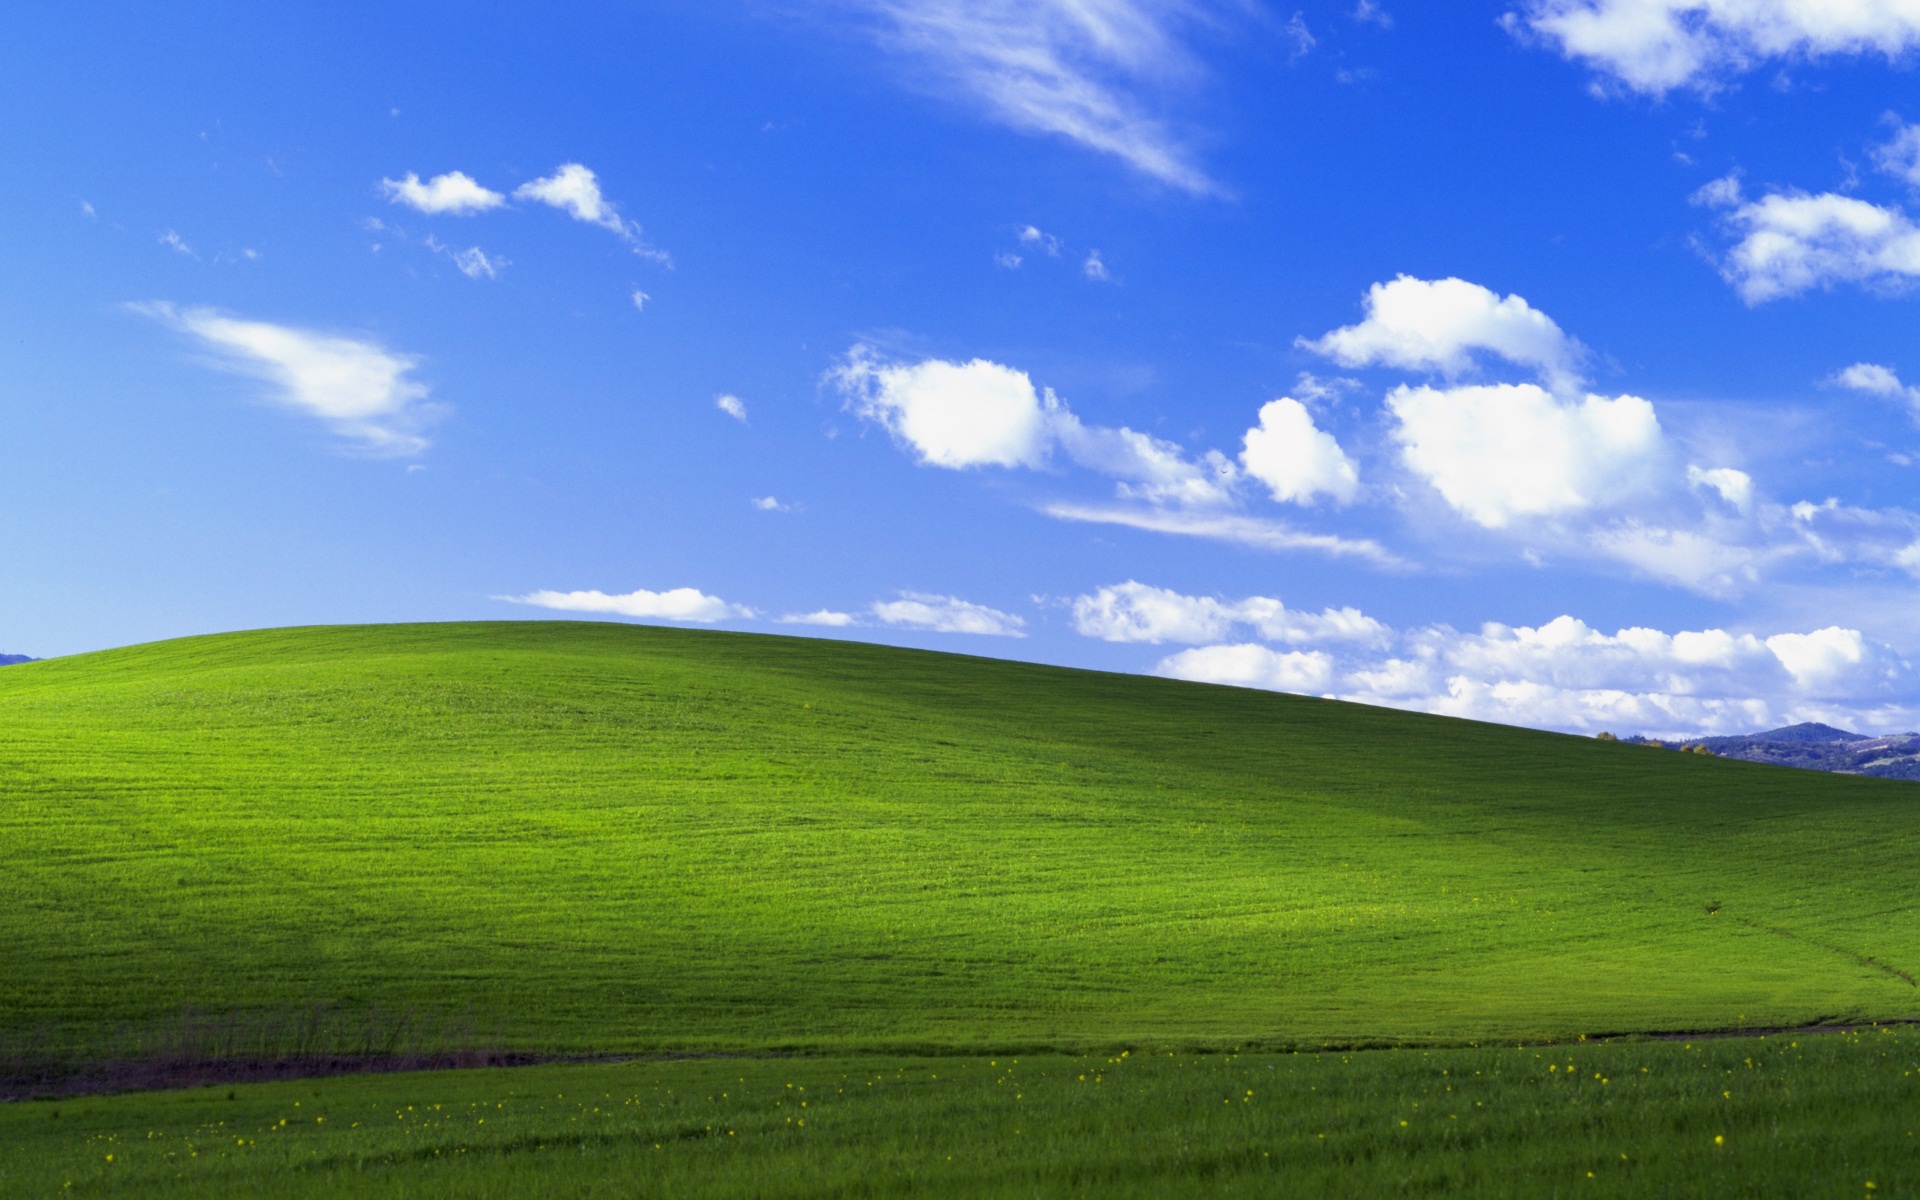 It's Probably The Most Viewed Photo Of All Time - Imagen De Windows Xp , HD Wallpaper & Backgrounds